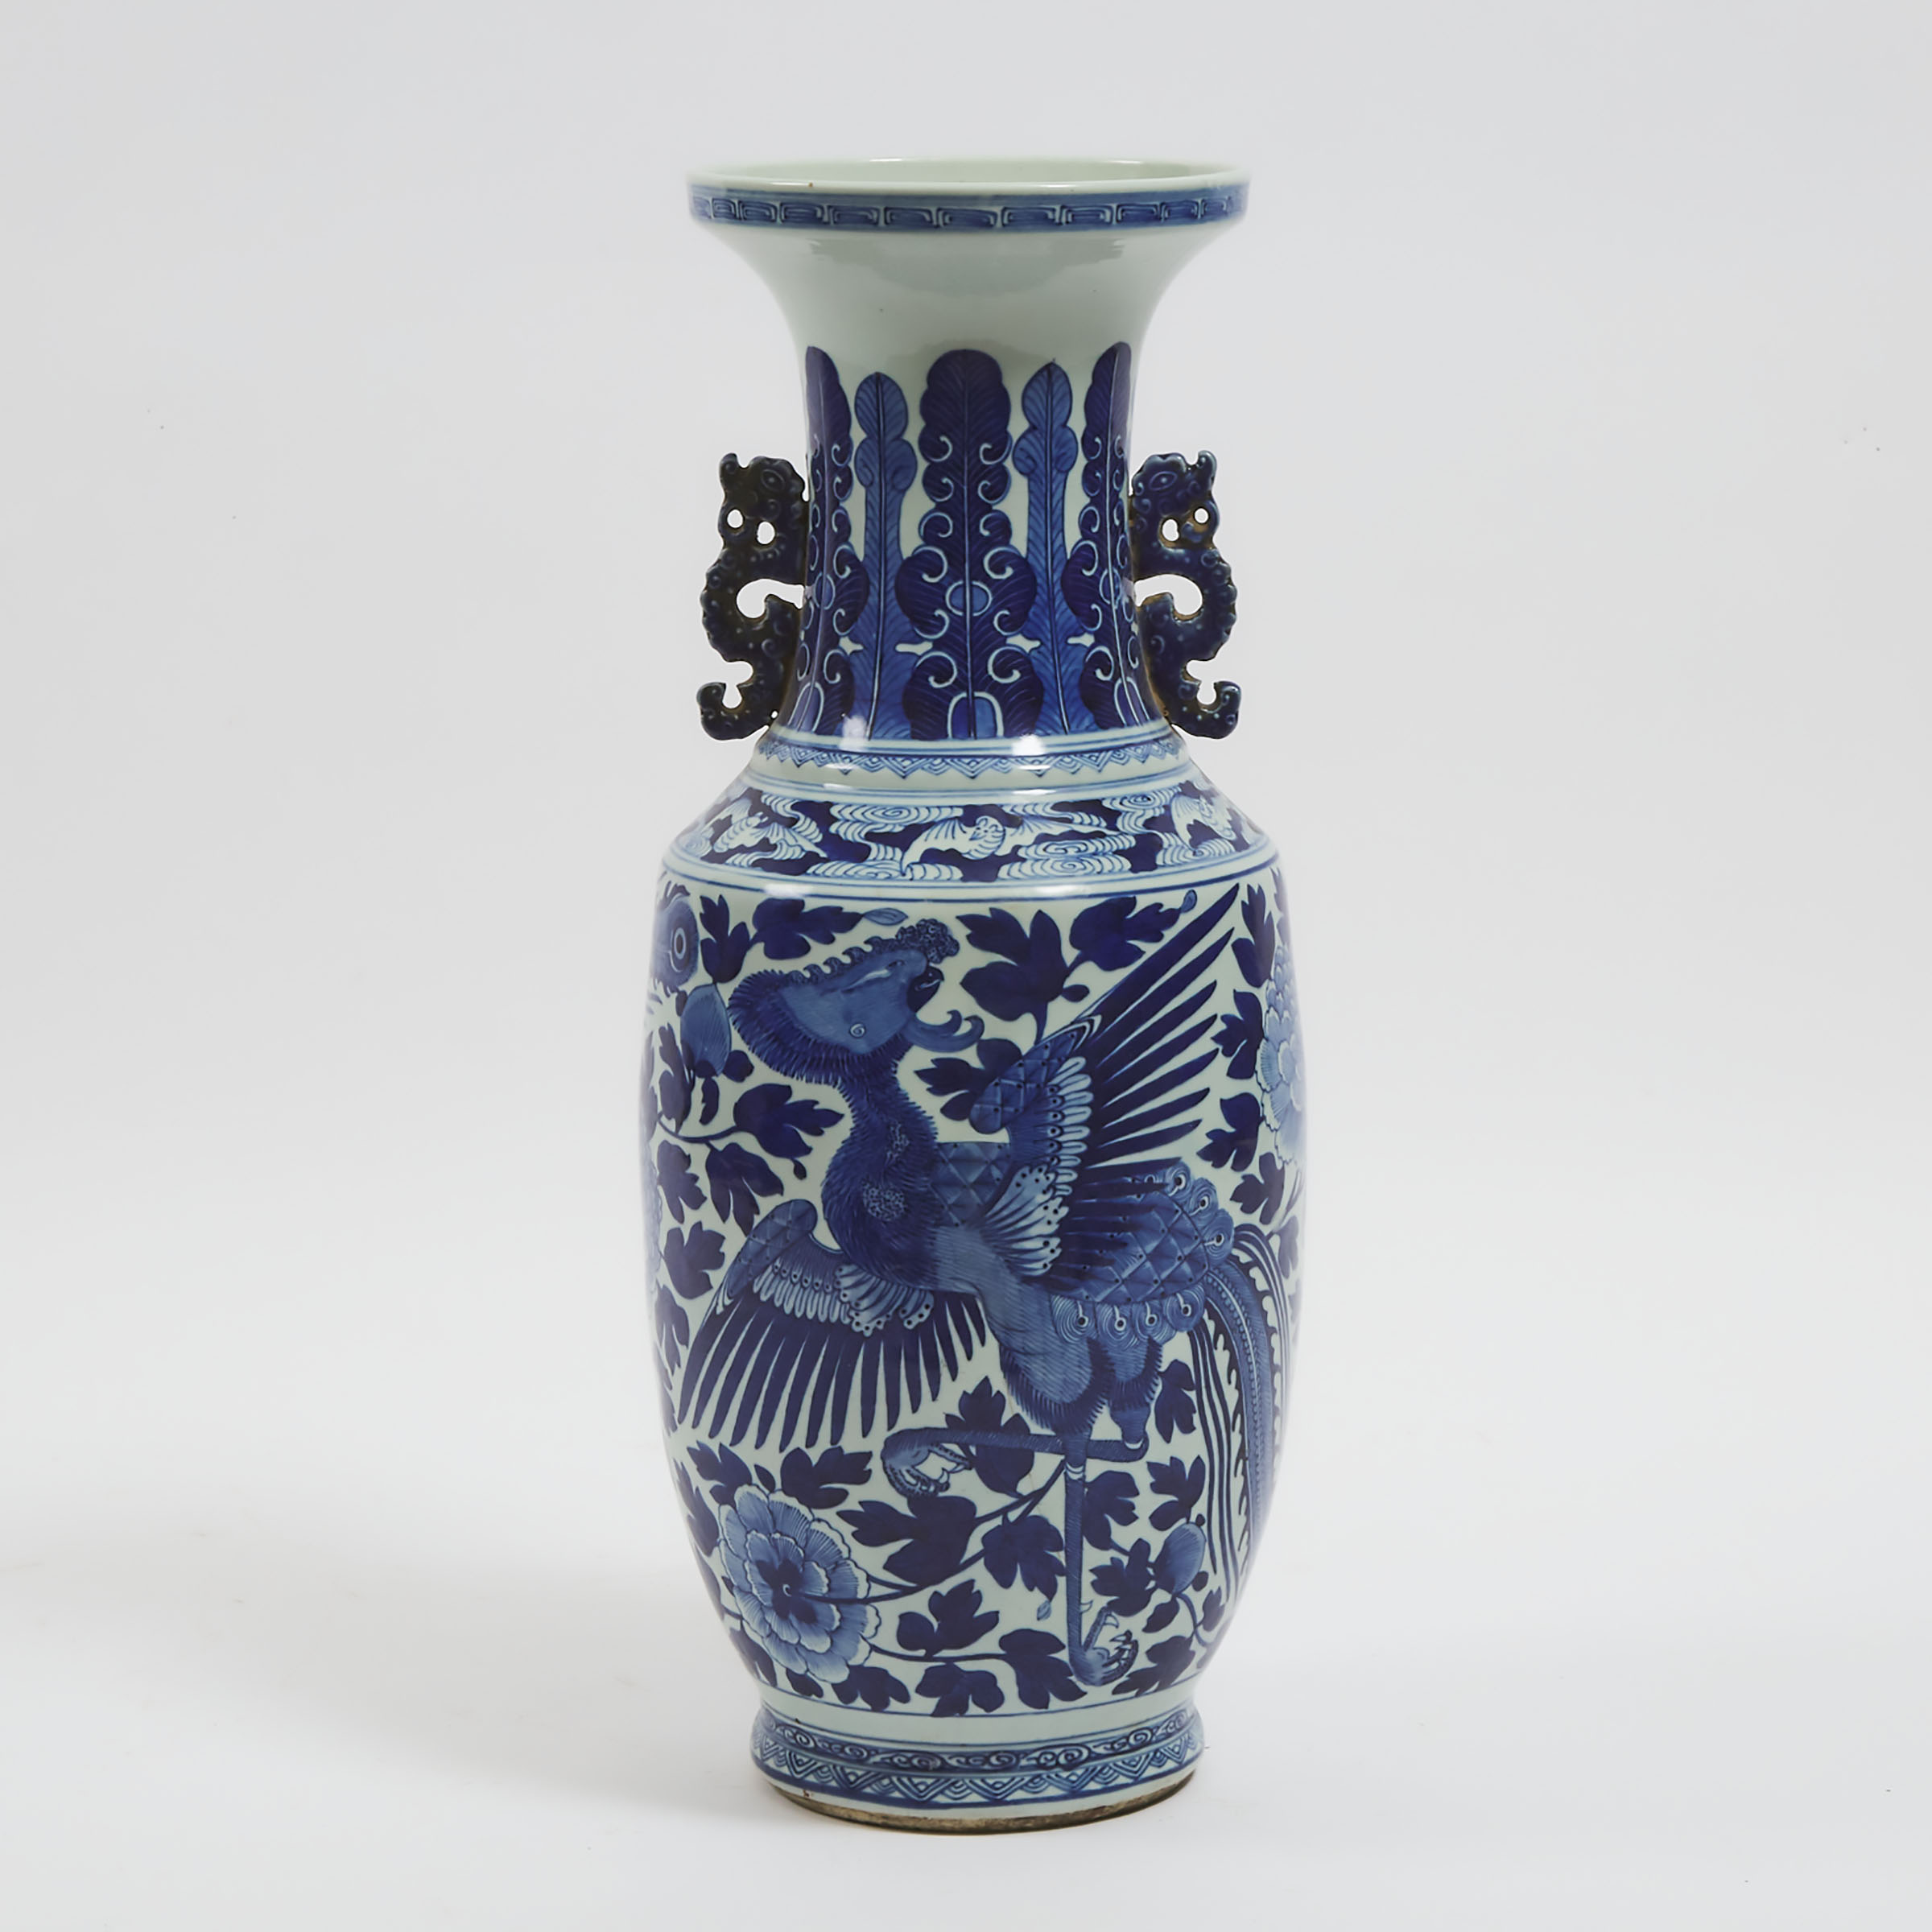 A Blue and White 'Phoenix' Vase, Early 20th Century